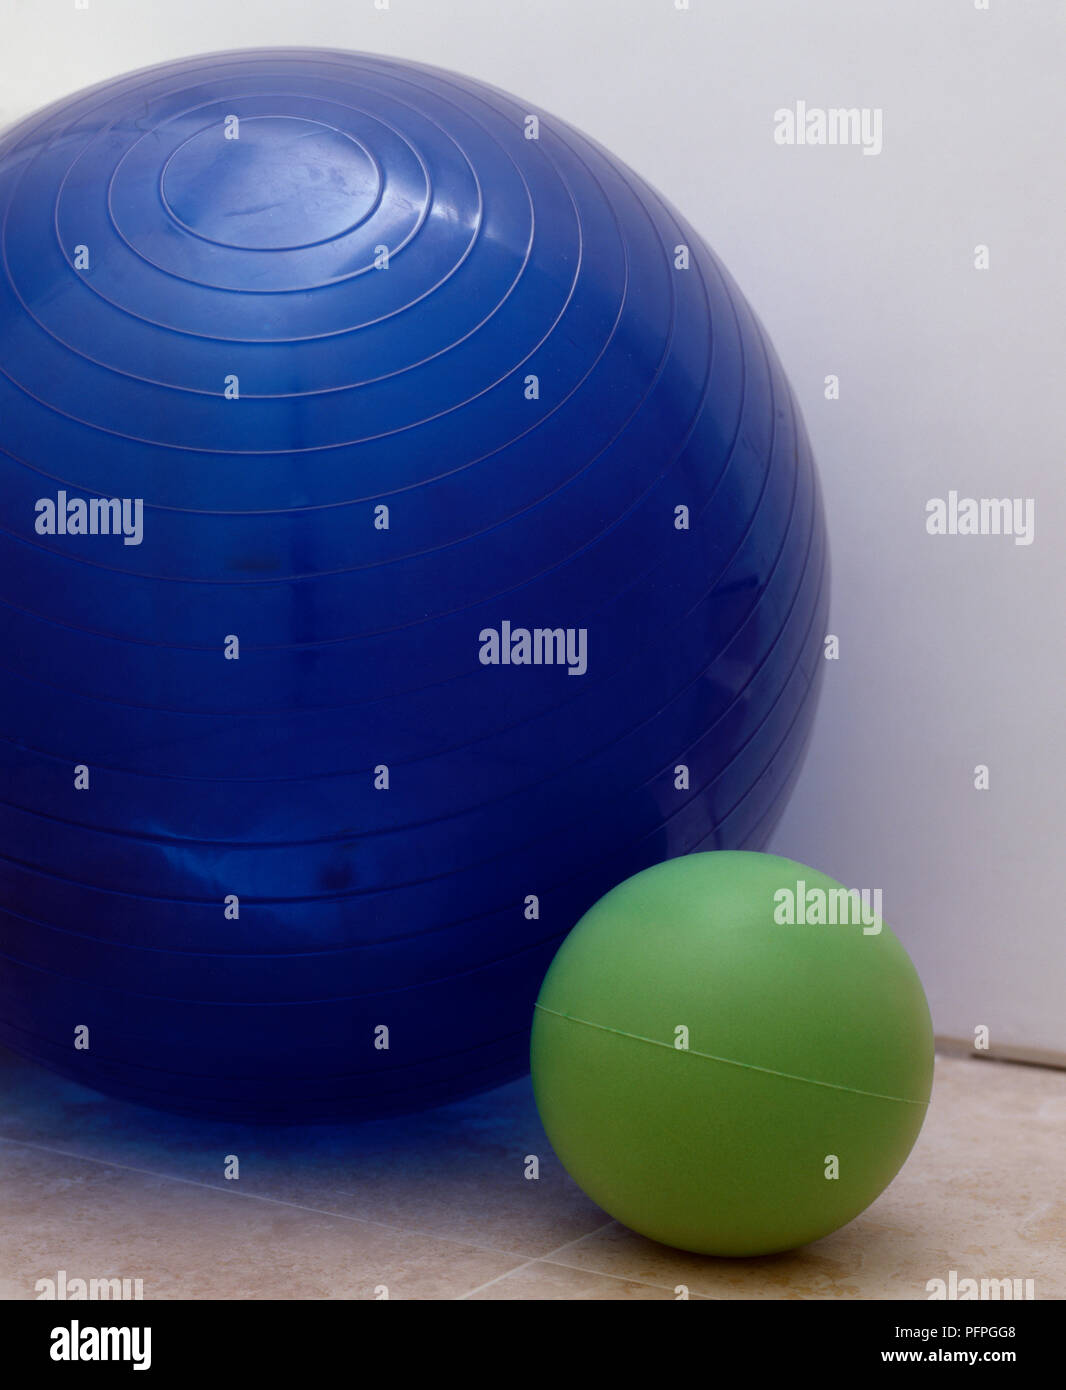 A large blue ball and a smaller green ball side by side Stock Photo